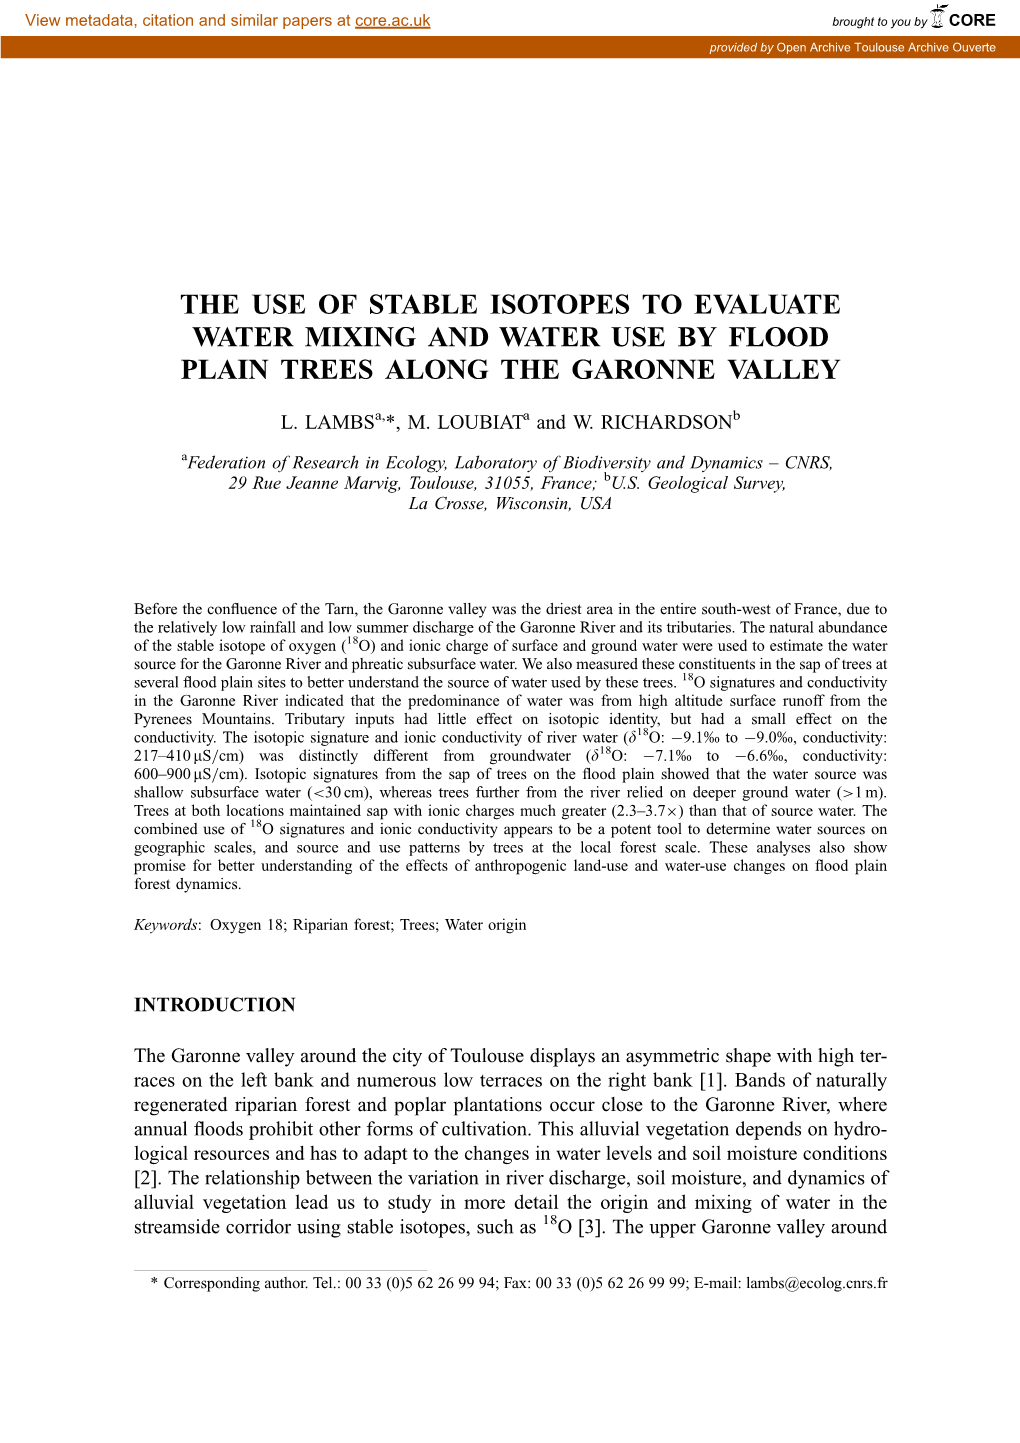 The Use of Stable Isotopes to Evaluate Water Mixing and Water Use by Flood Plain Trees Along the Garonne Valley